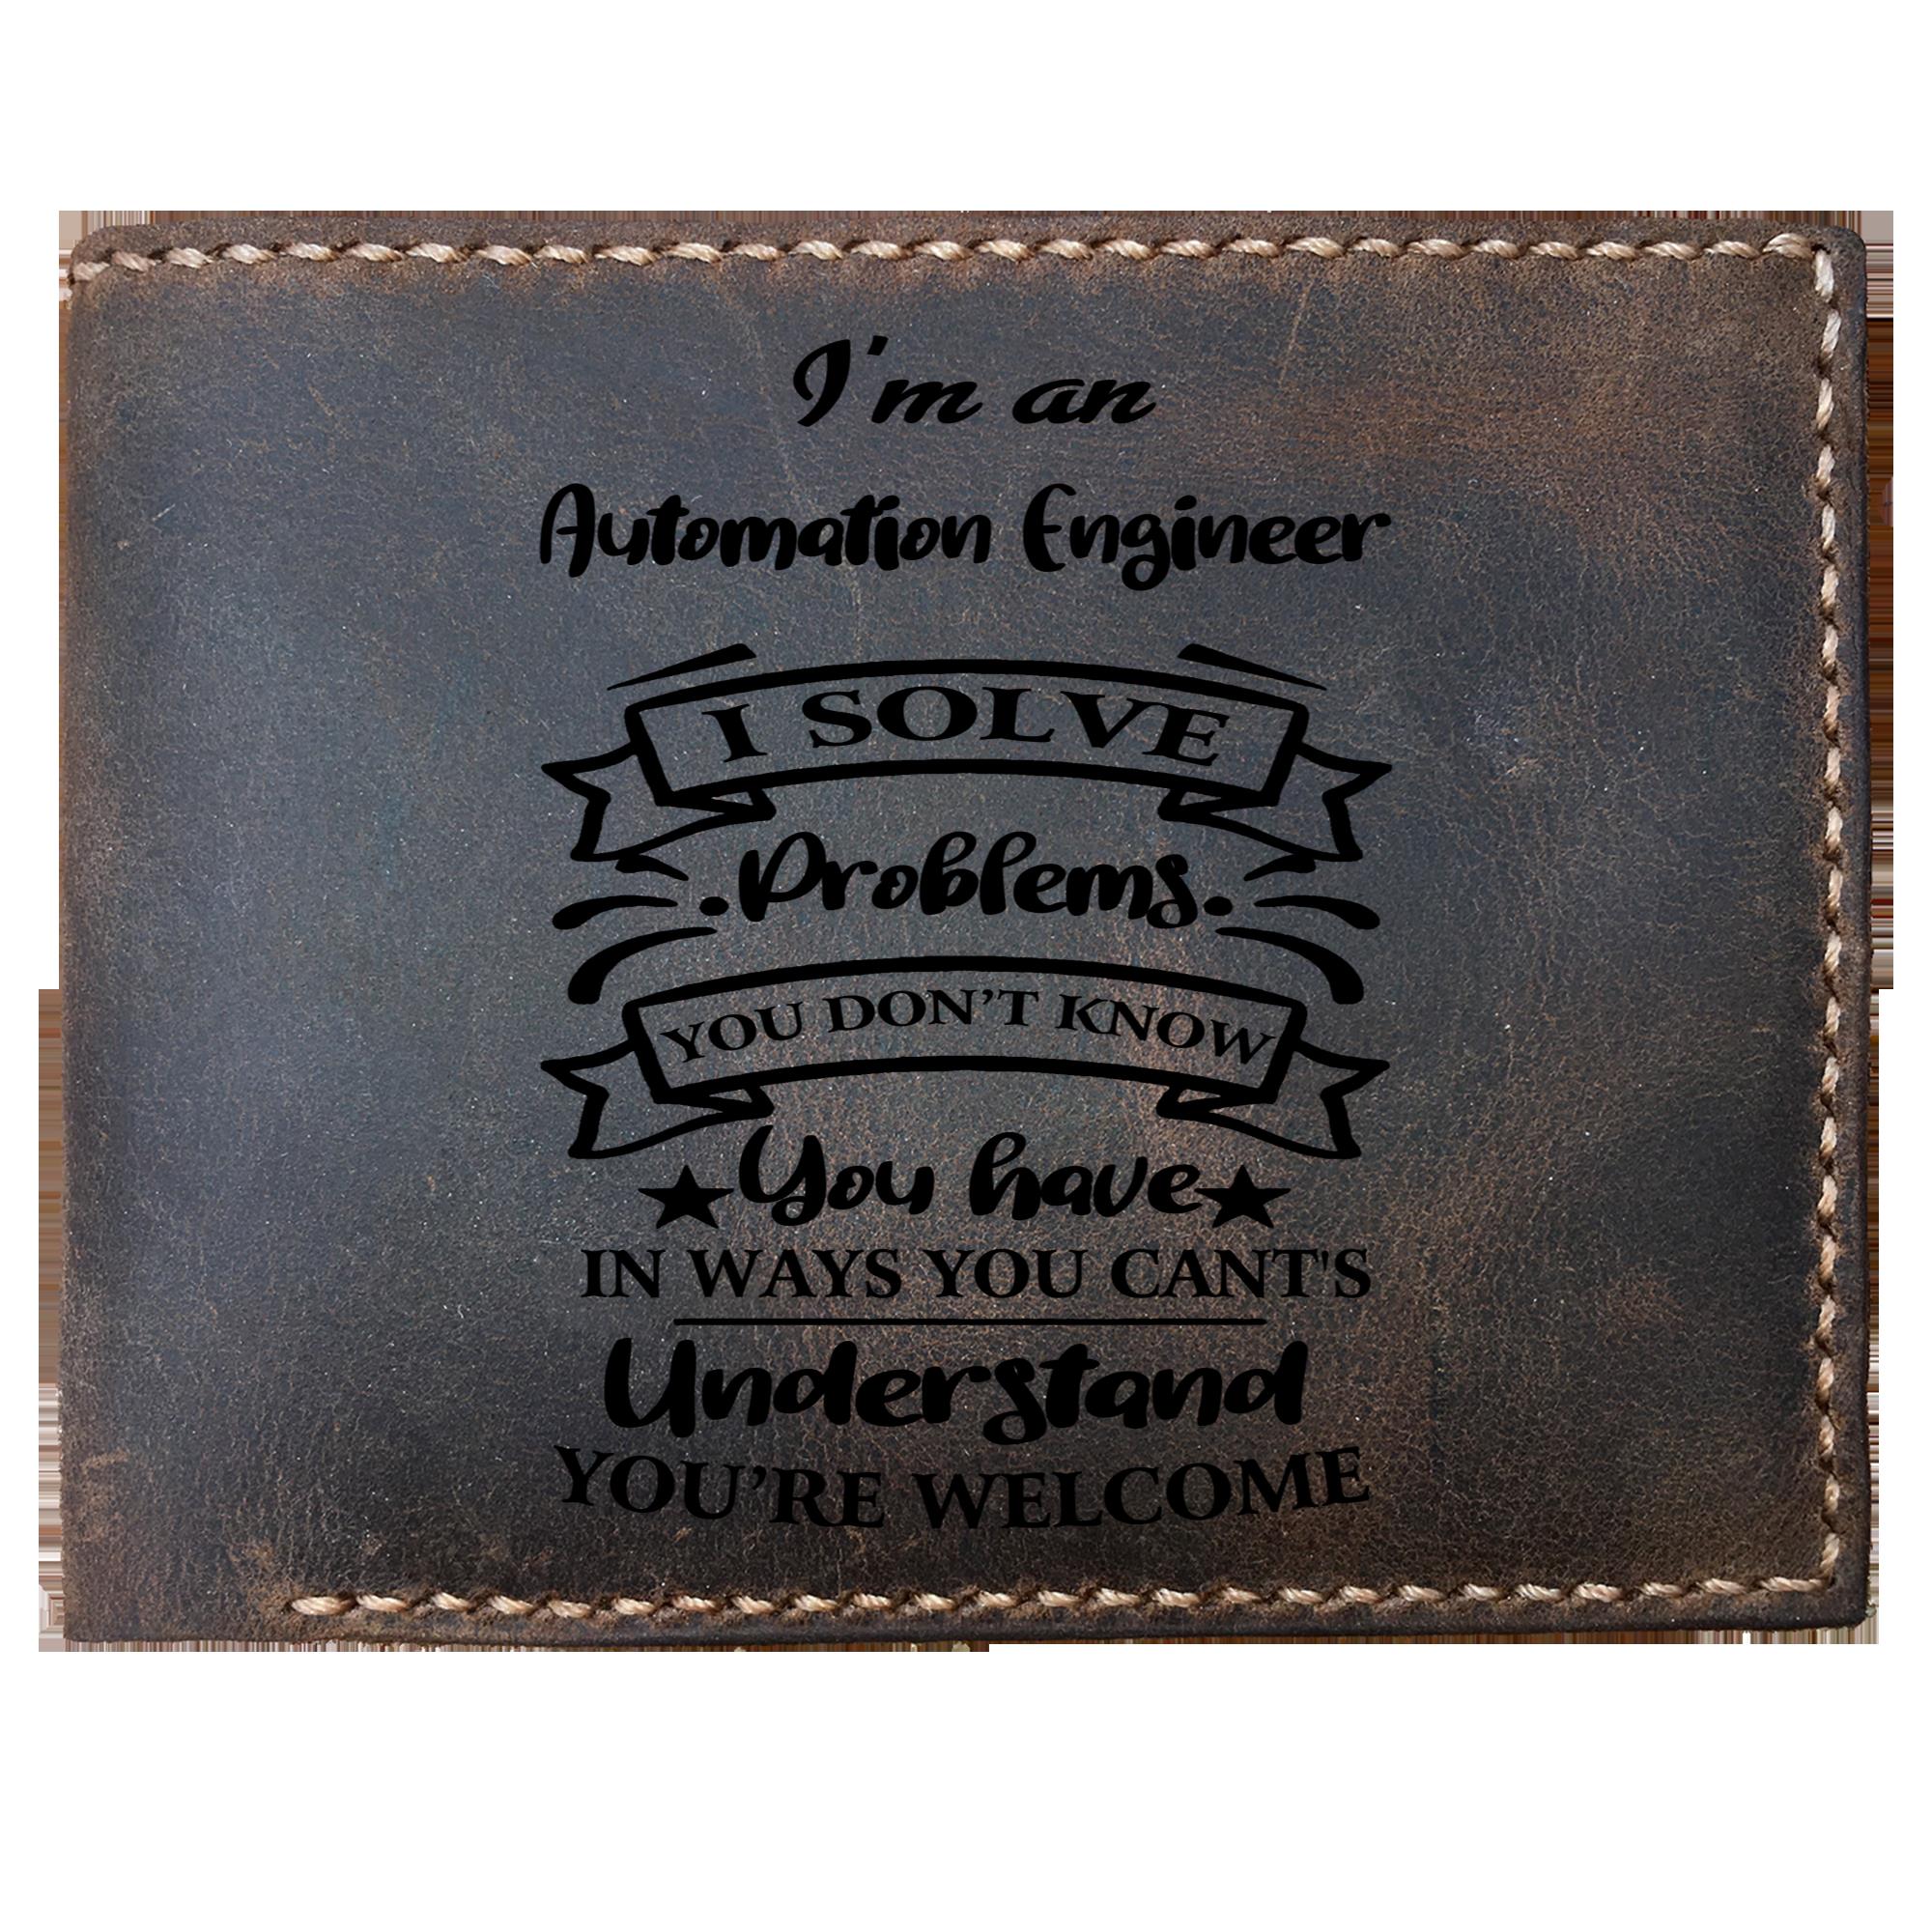 Skitongifts Funny Custom Laser Engraved Bifold Leather Wallet For Men, I'm an Automation Engineer Solve Problems, Father's Day Gifts